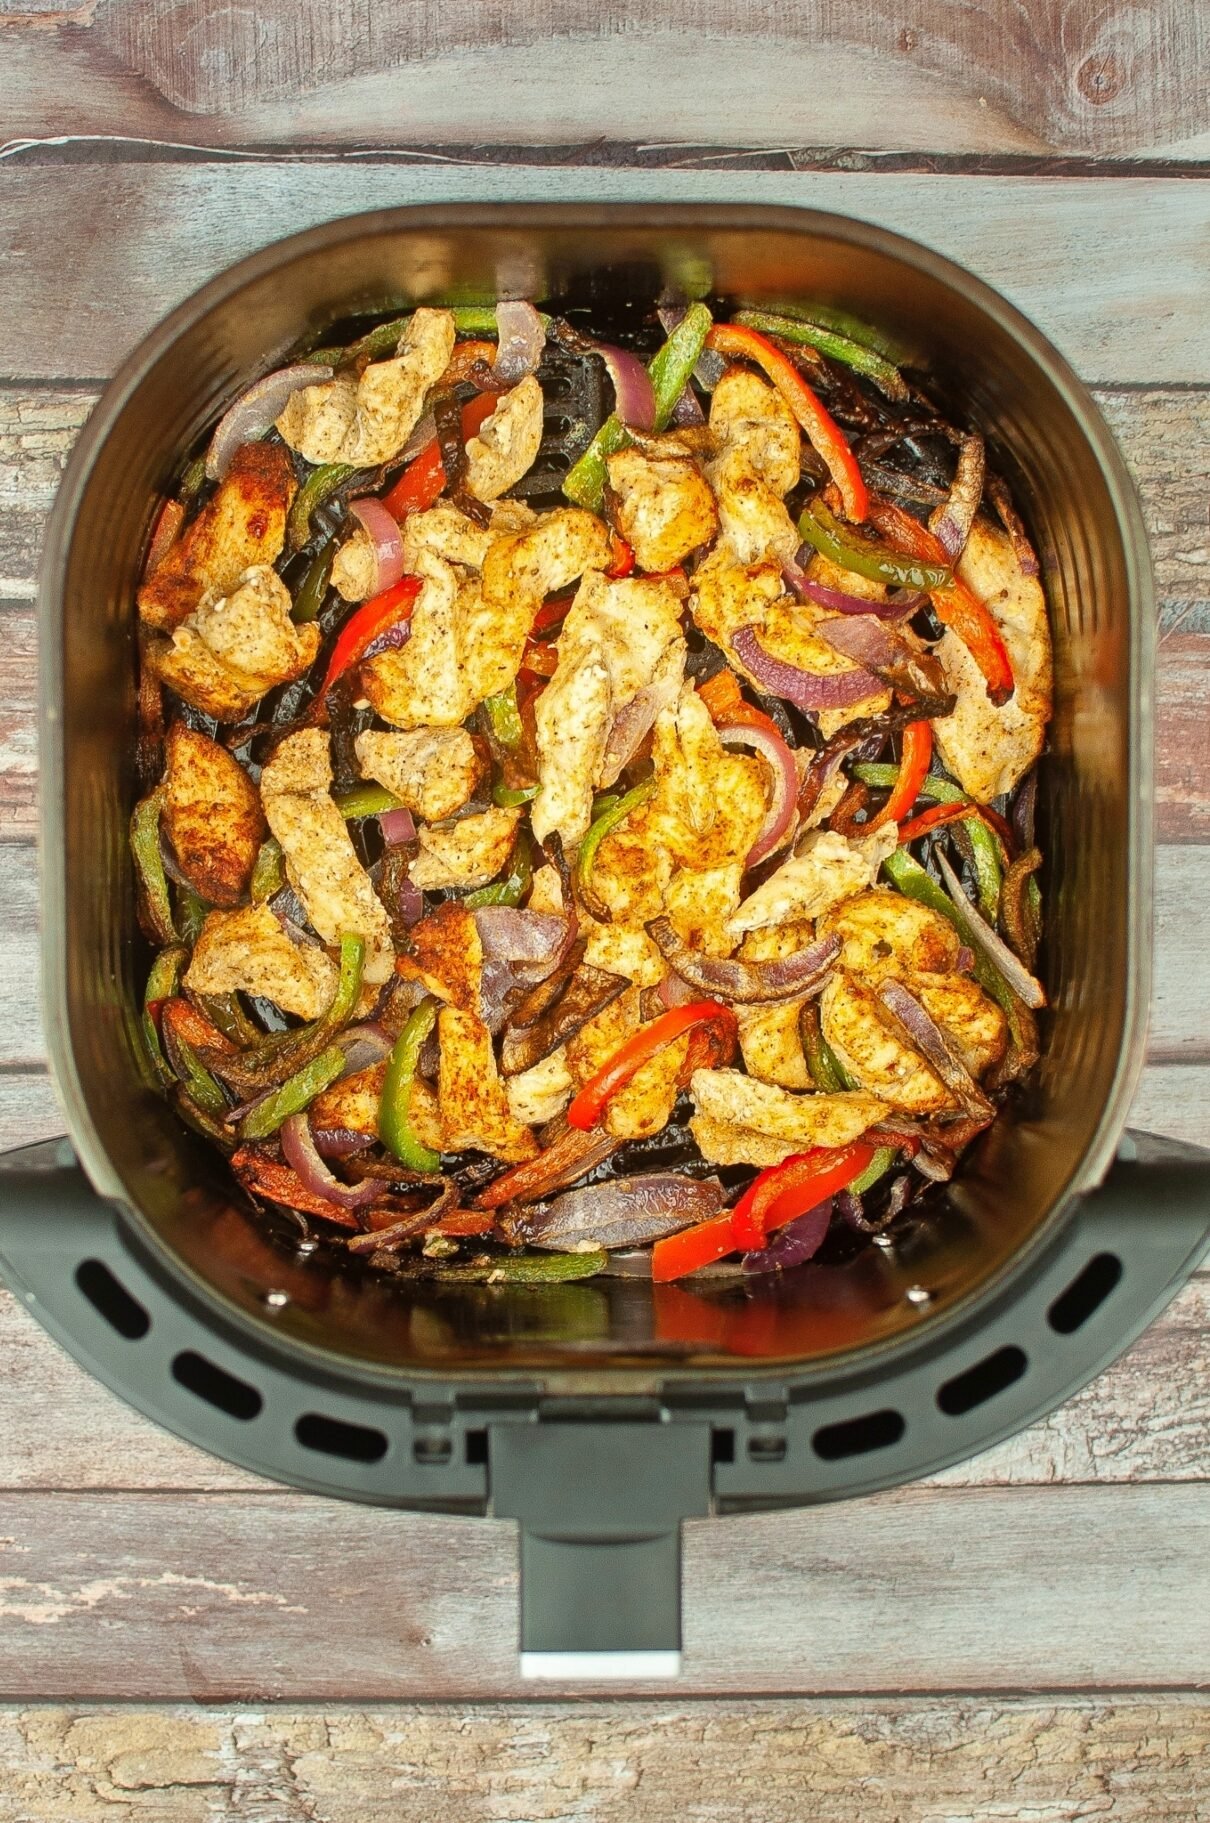 Whip up some mouthwatering chicken fajitas for air fryer - a simple yet tasty treat for your taste buds! Perfect for busy weeknights.